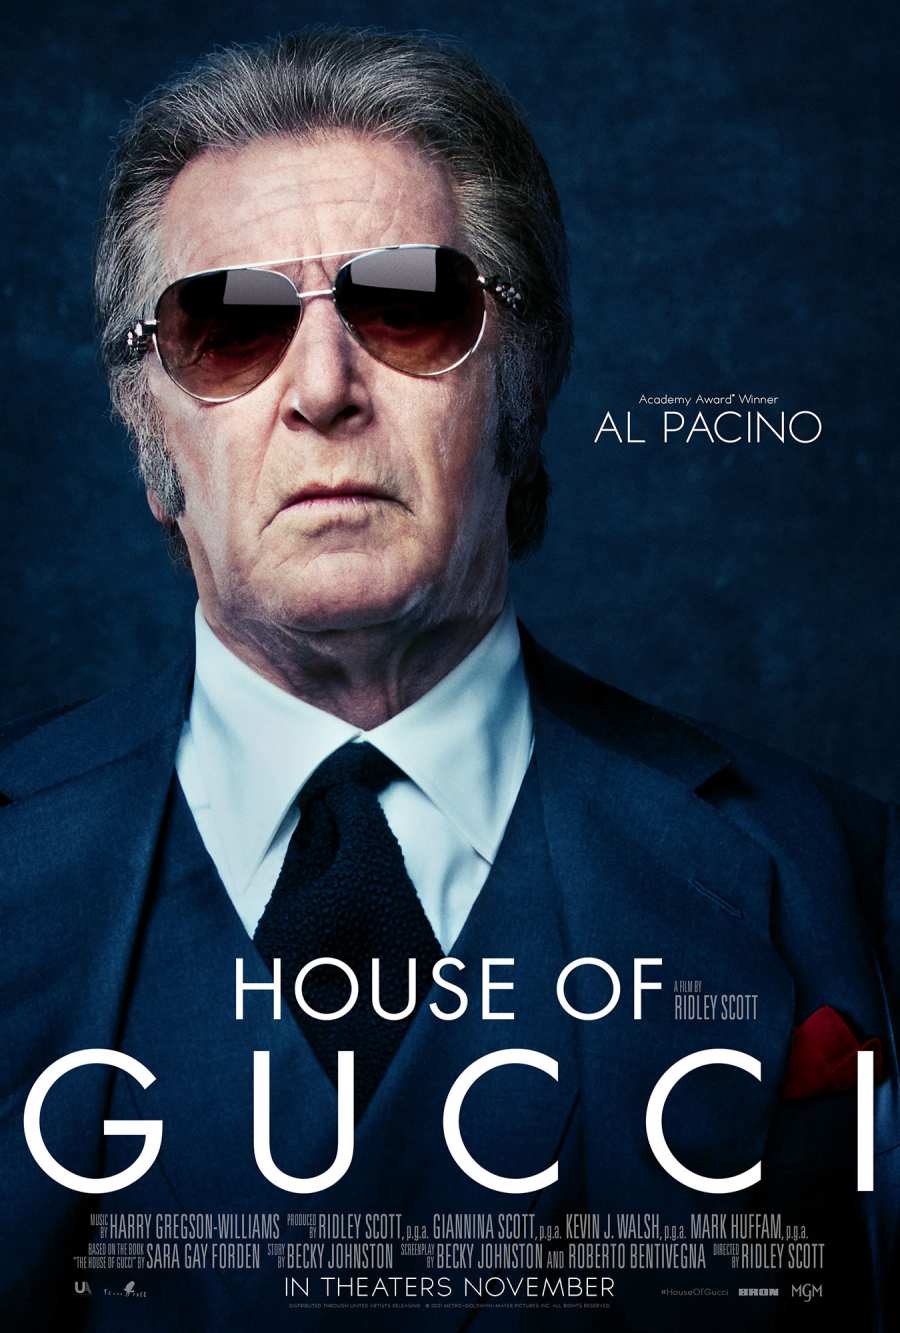 House of Gucci Character Poster Al Pacino